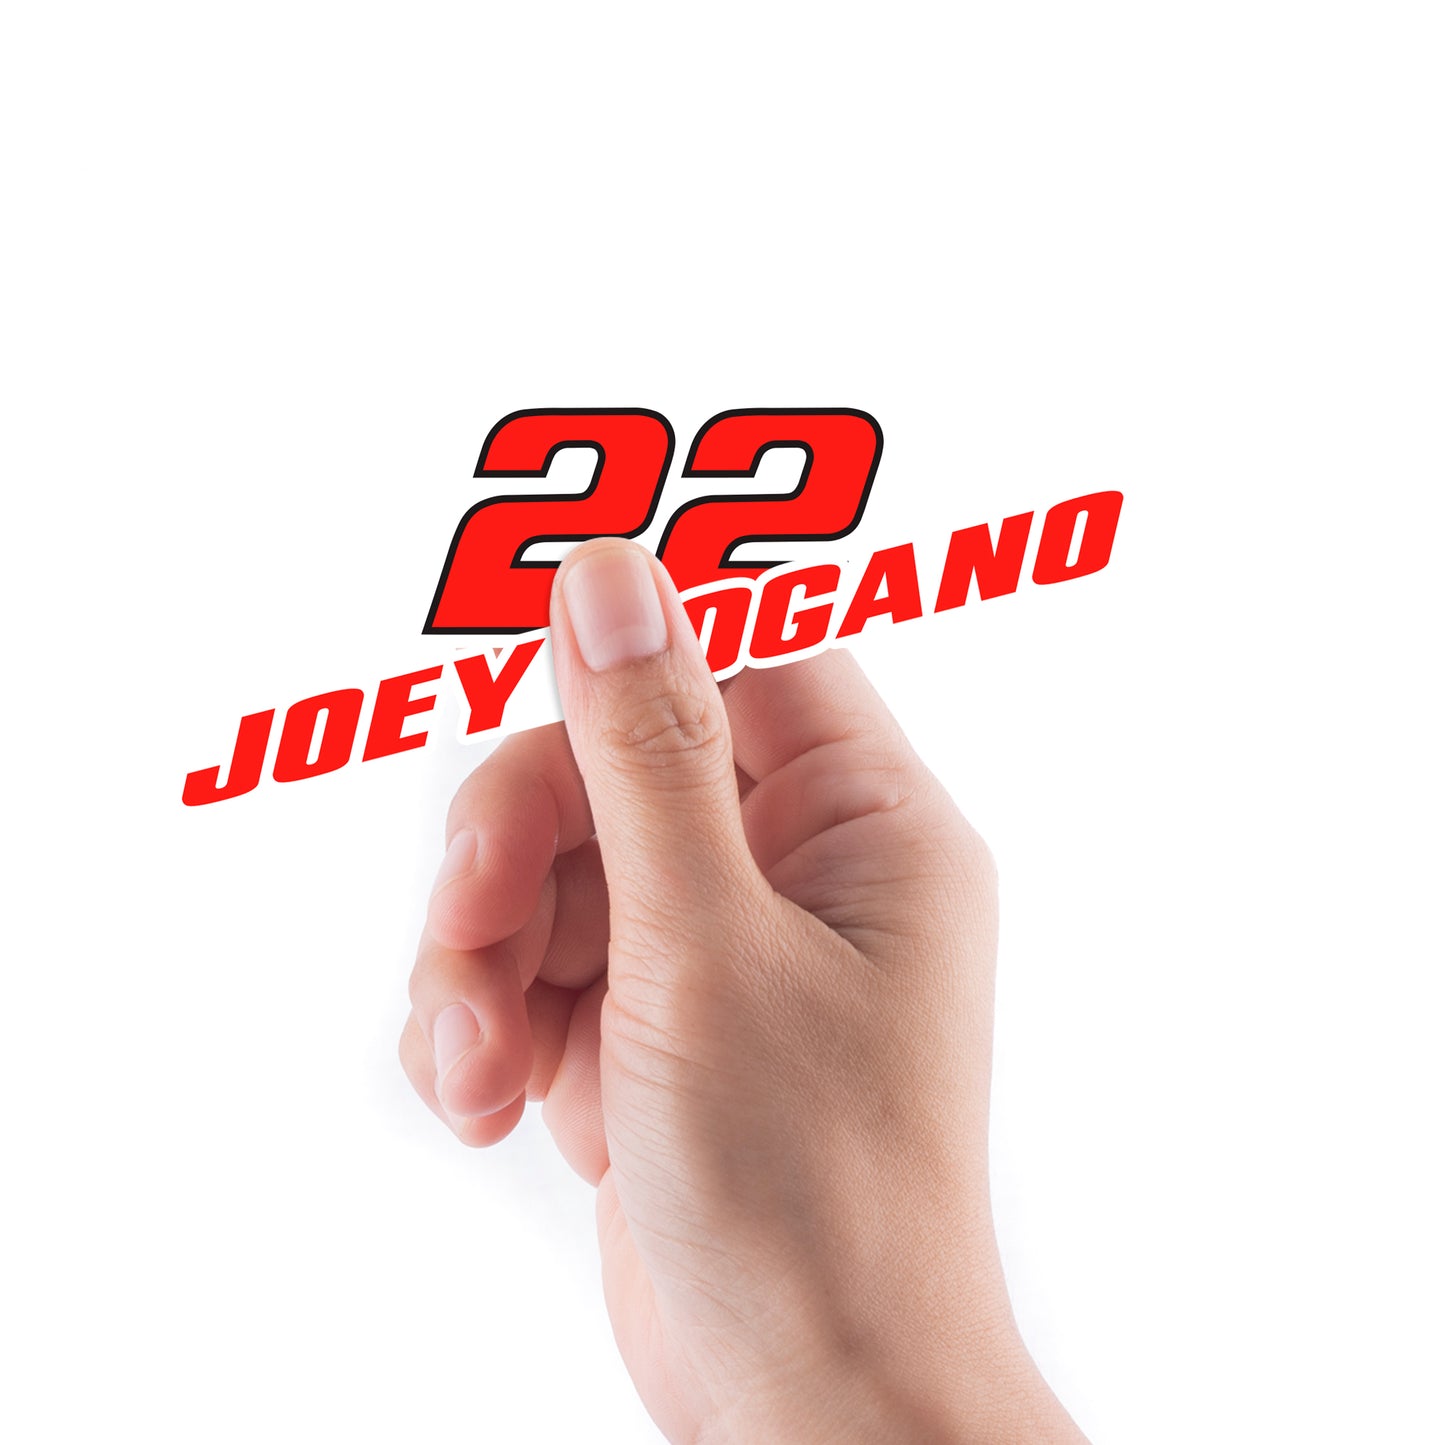 Sheet of 5 -Joey Logano 2021 #22 Logo MINIS        - Officially Licensed NASCAR Removable    Adhesive Decal